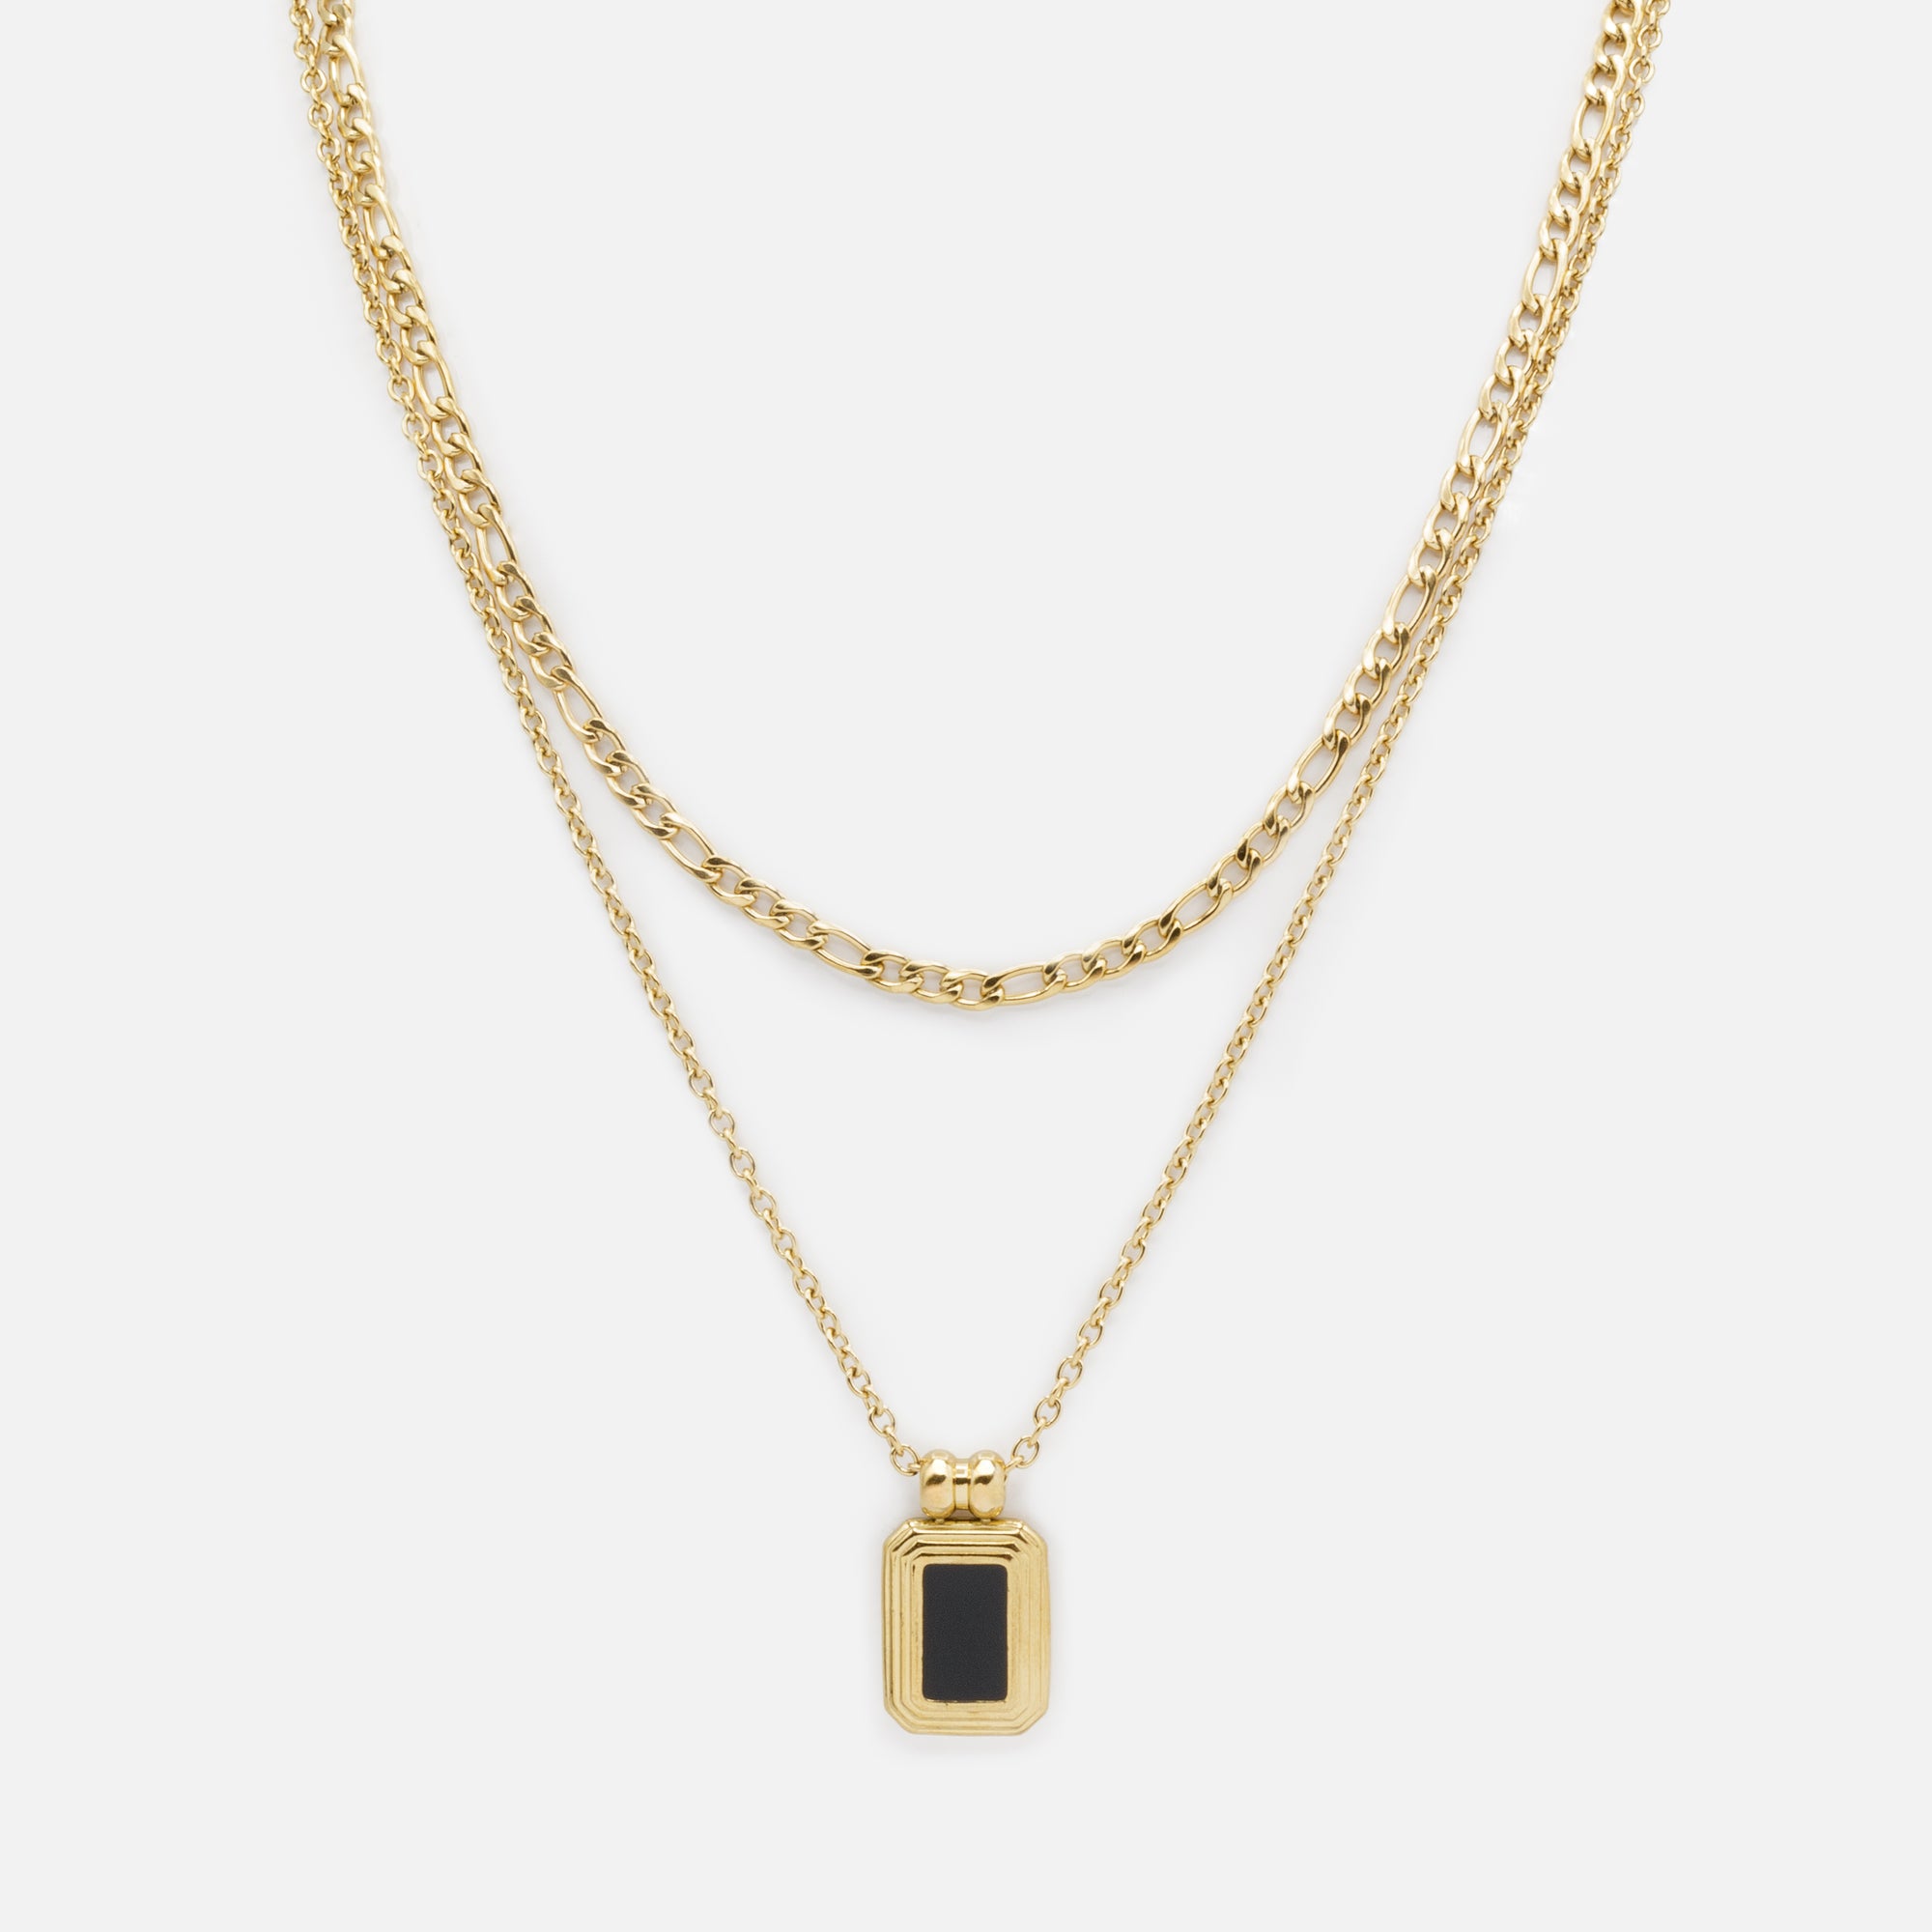 Gold Figaro Link Chain and Black Rectangular Charm Necklace Set in Stainless Steel